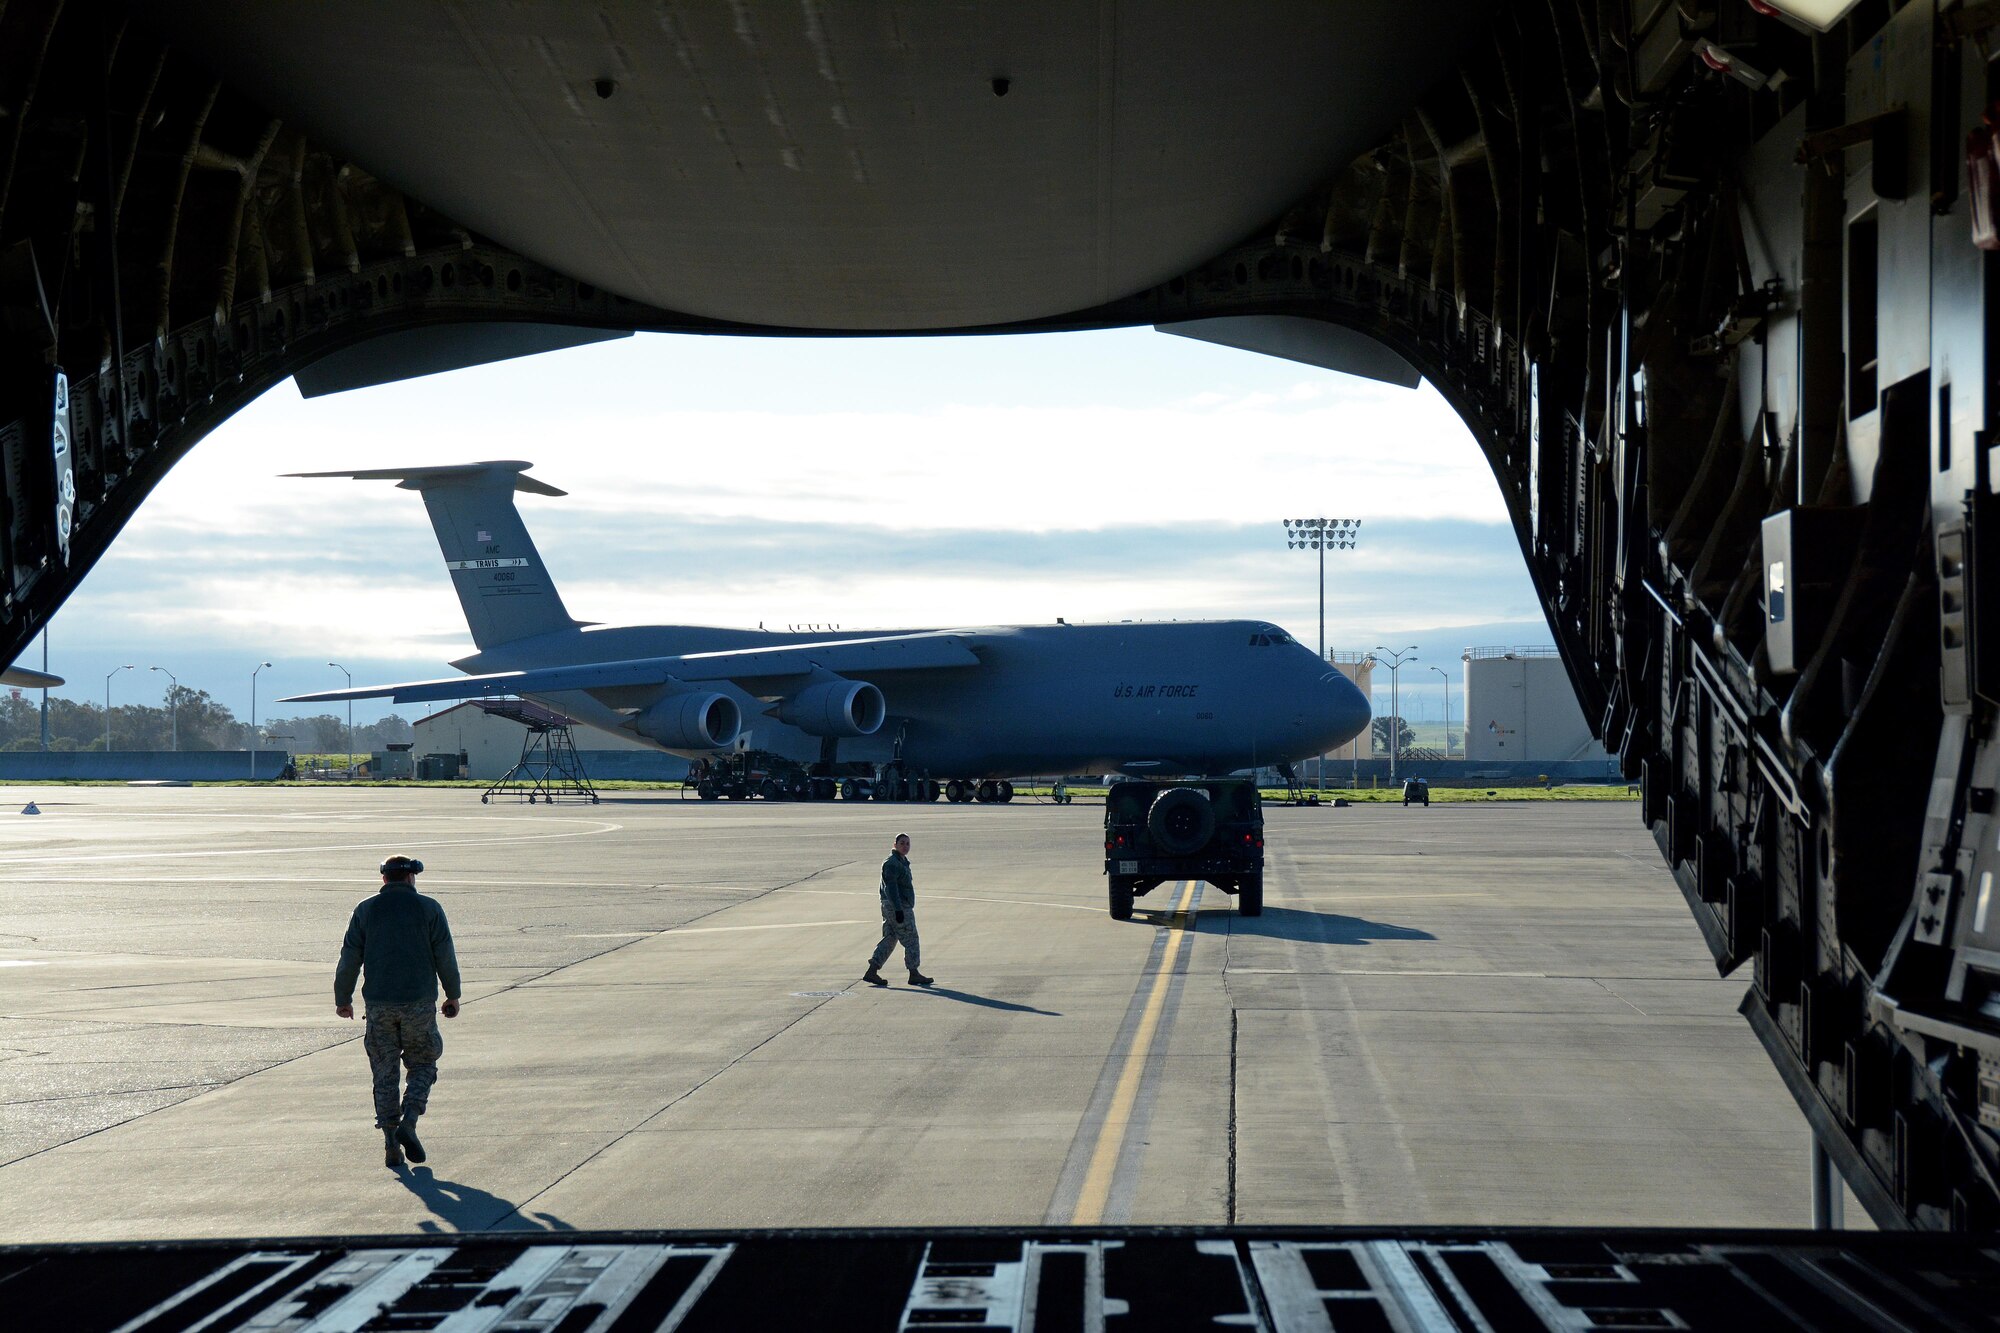 Citizen Airmen from the 55th Areoport Squadron guide a Humvee into place before it is backed into a C-17 Globemaster III prior to its take off from Travis Air Force Base, Calif., for Patriot Wyvern on Feb. 11, 2017. Patriot Wyvern is a hands-on, bi-annual event conducted by the 349th Air Mobility Wing designed to hone combat skills and improve organizational interoperability. (U.S. Air Force photo/Staff Sgt. Daniel Phelps)